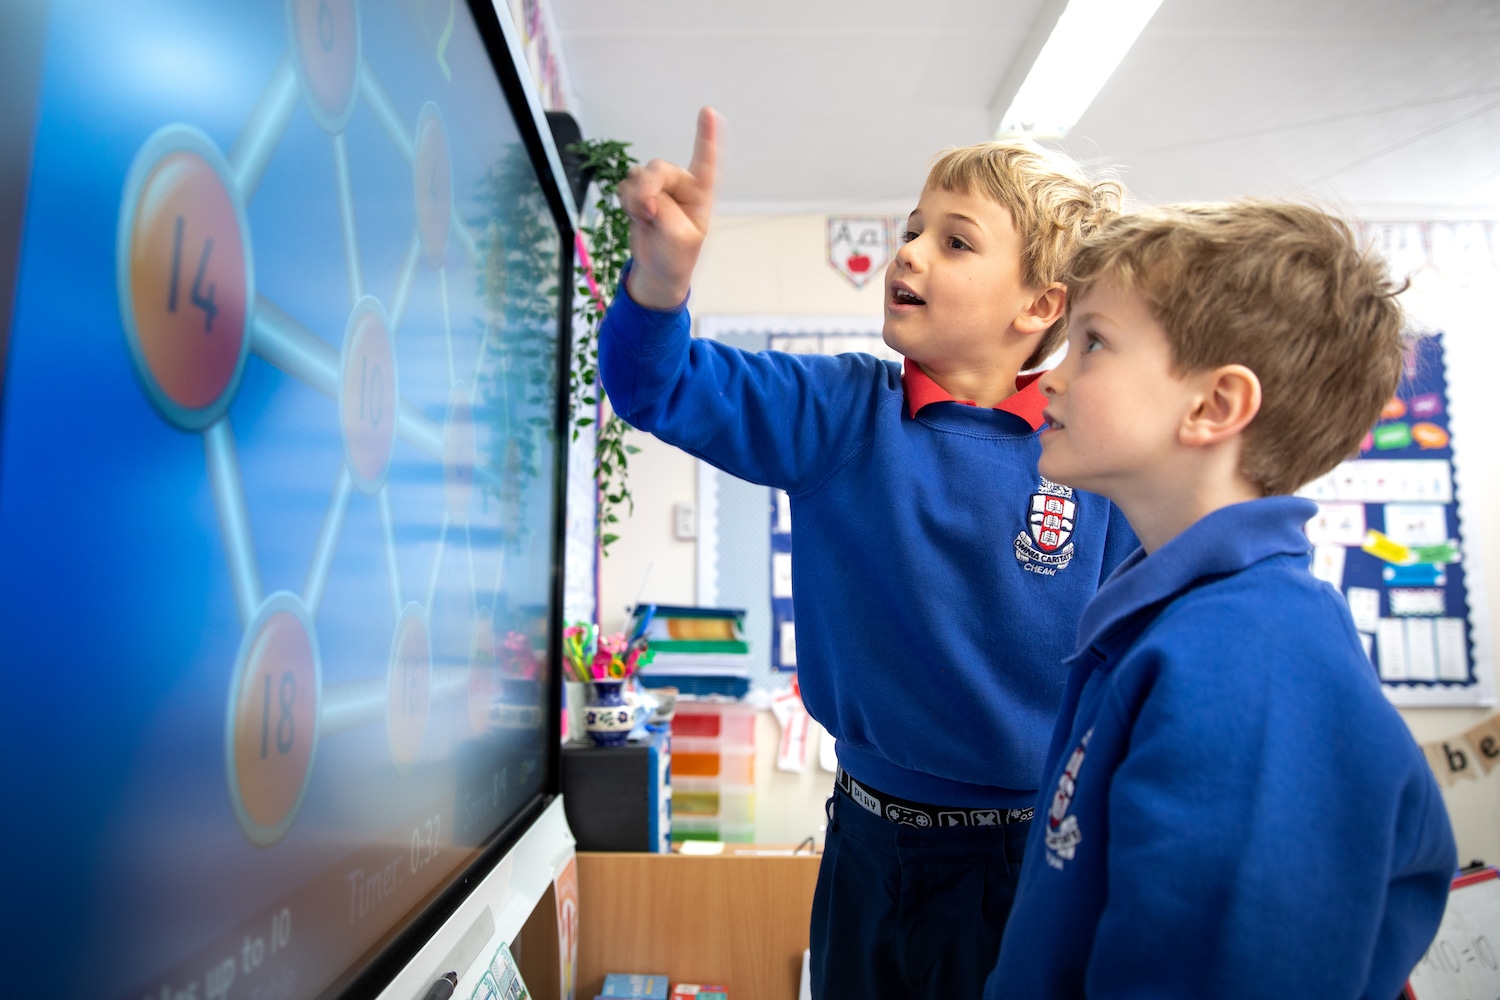 Pupils using a touch screen